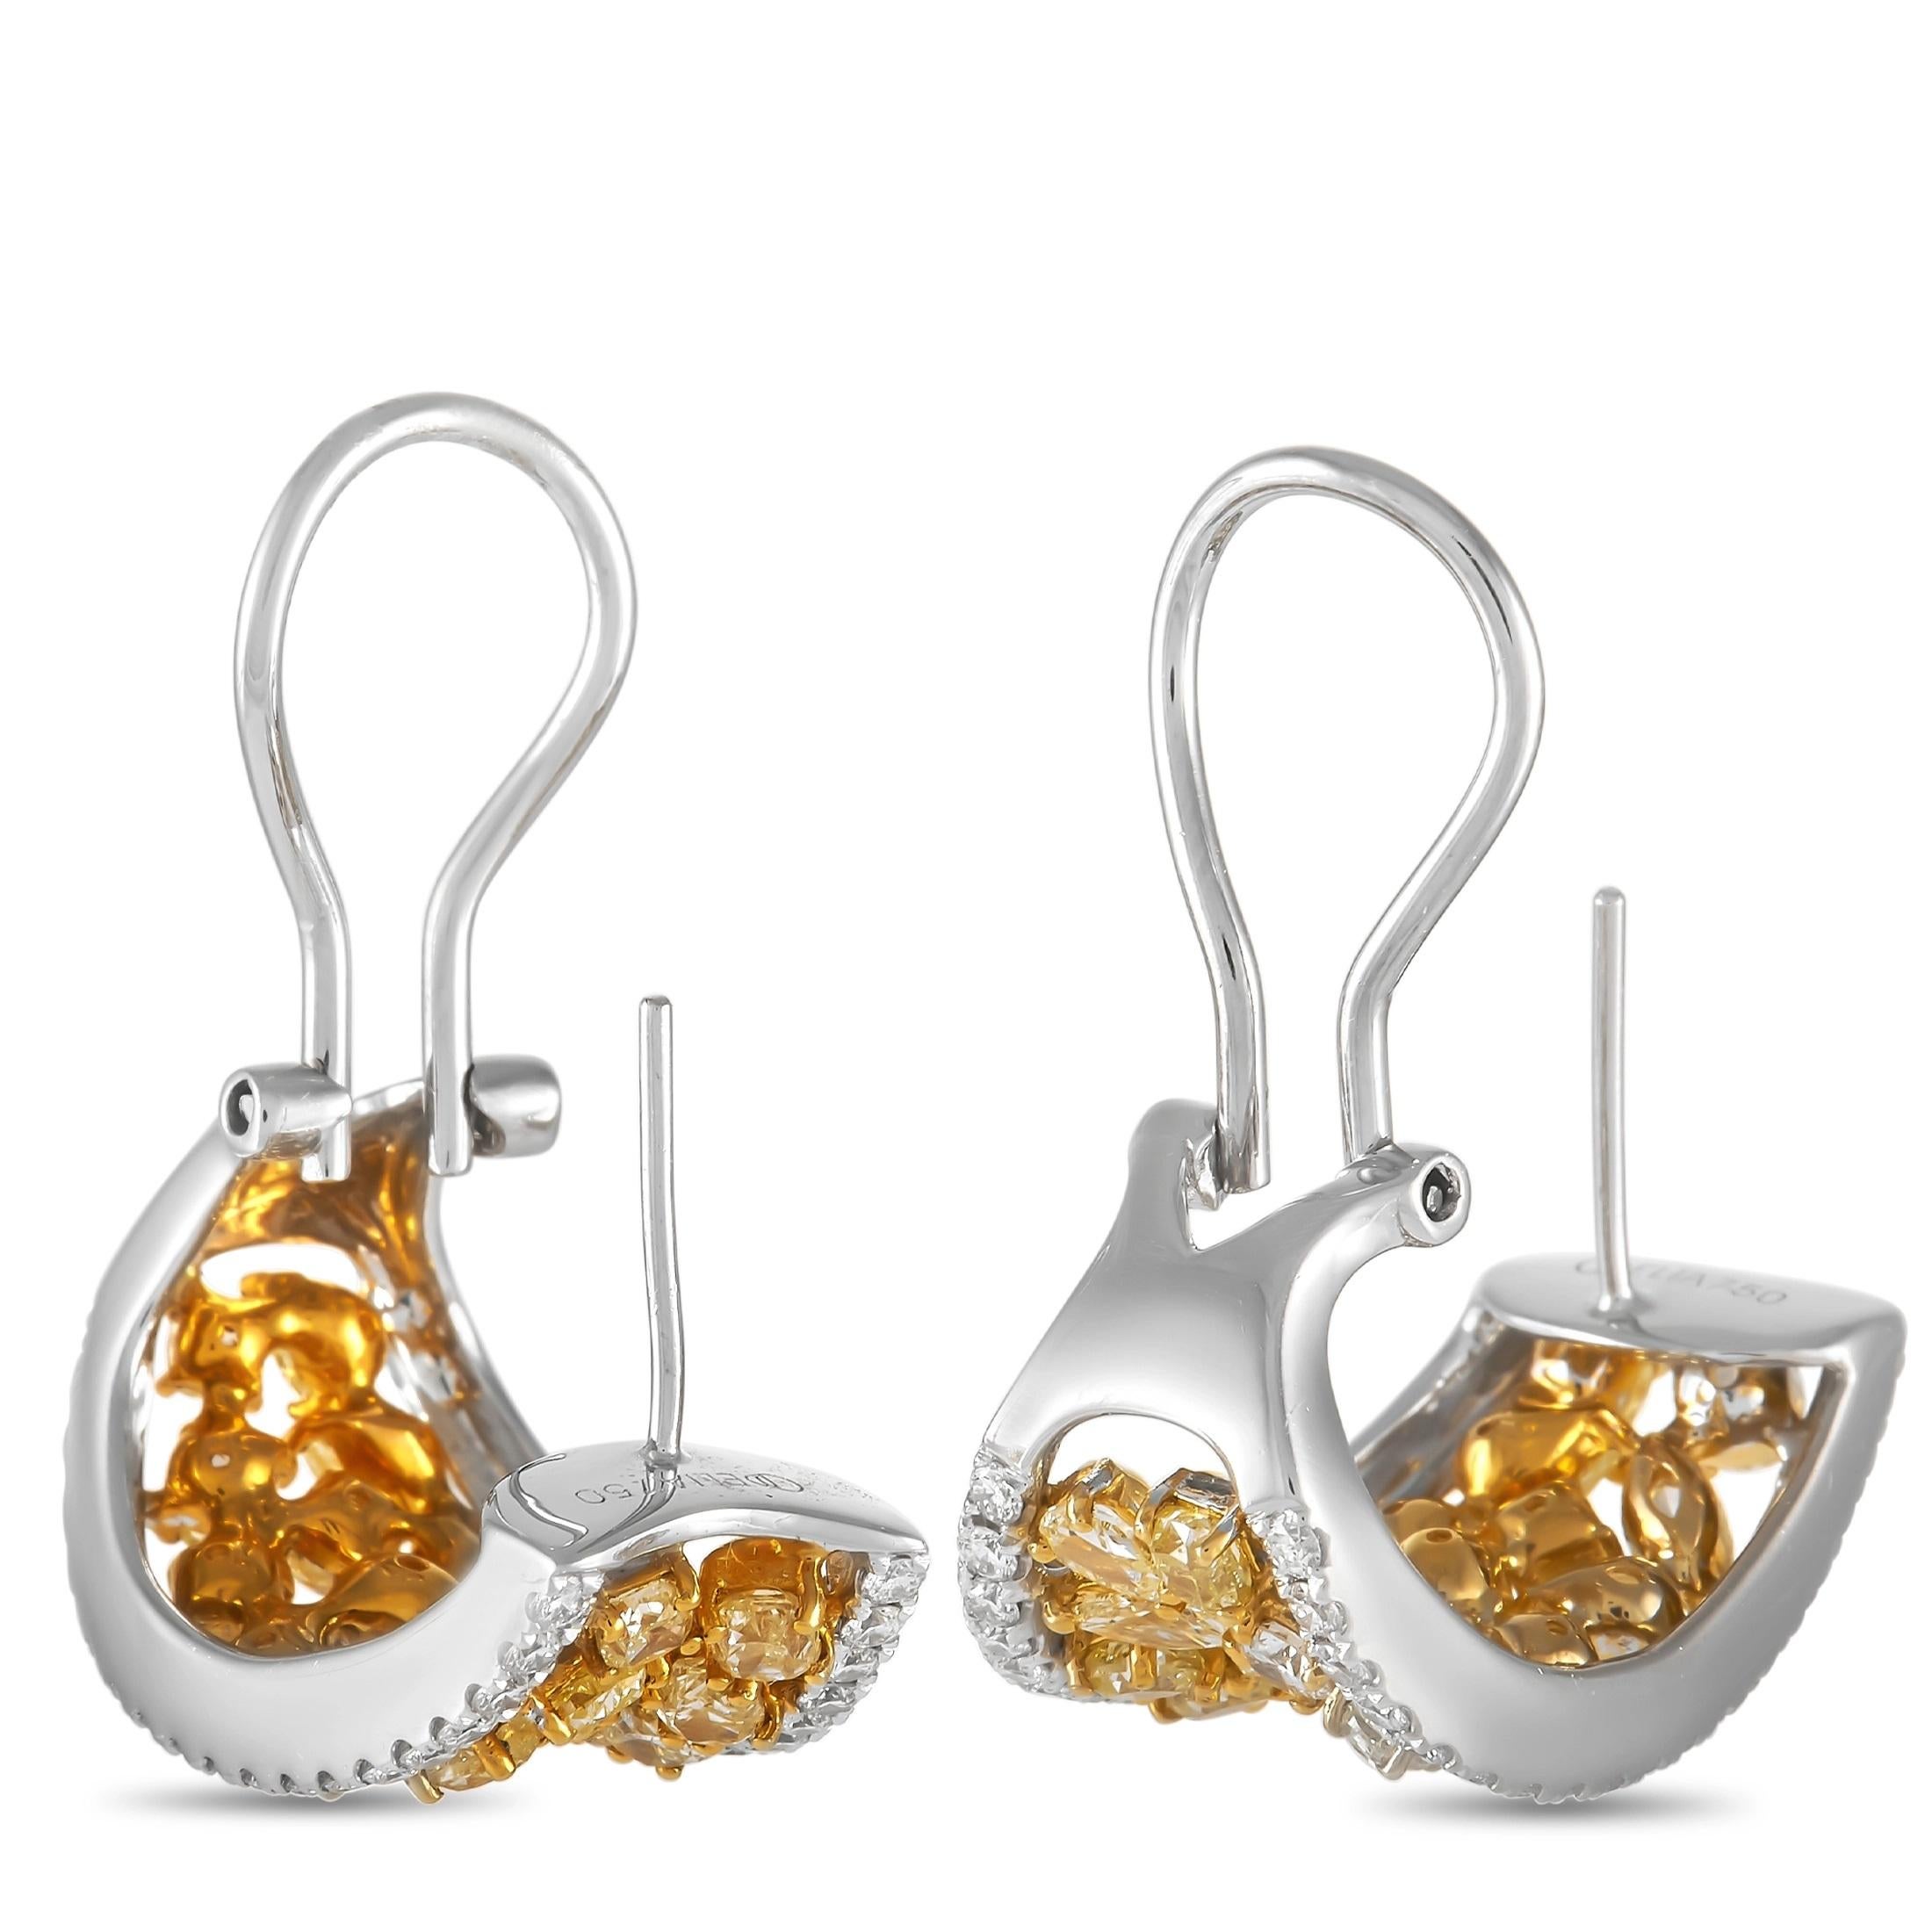 Luxury takes center stage when it comes to these elegant earrings. A stylish setting featuring 18K White Gold and 18K Yellow Gold provides the perfect foundation for gemstones with contrasting hues. On the edges, you’ll find a series of white